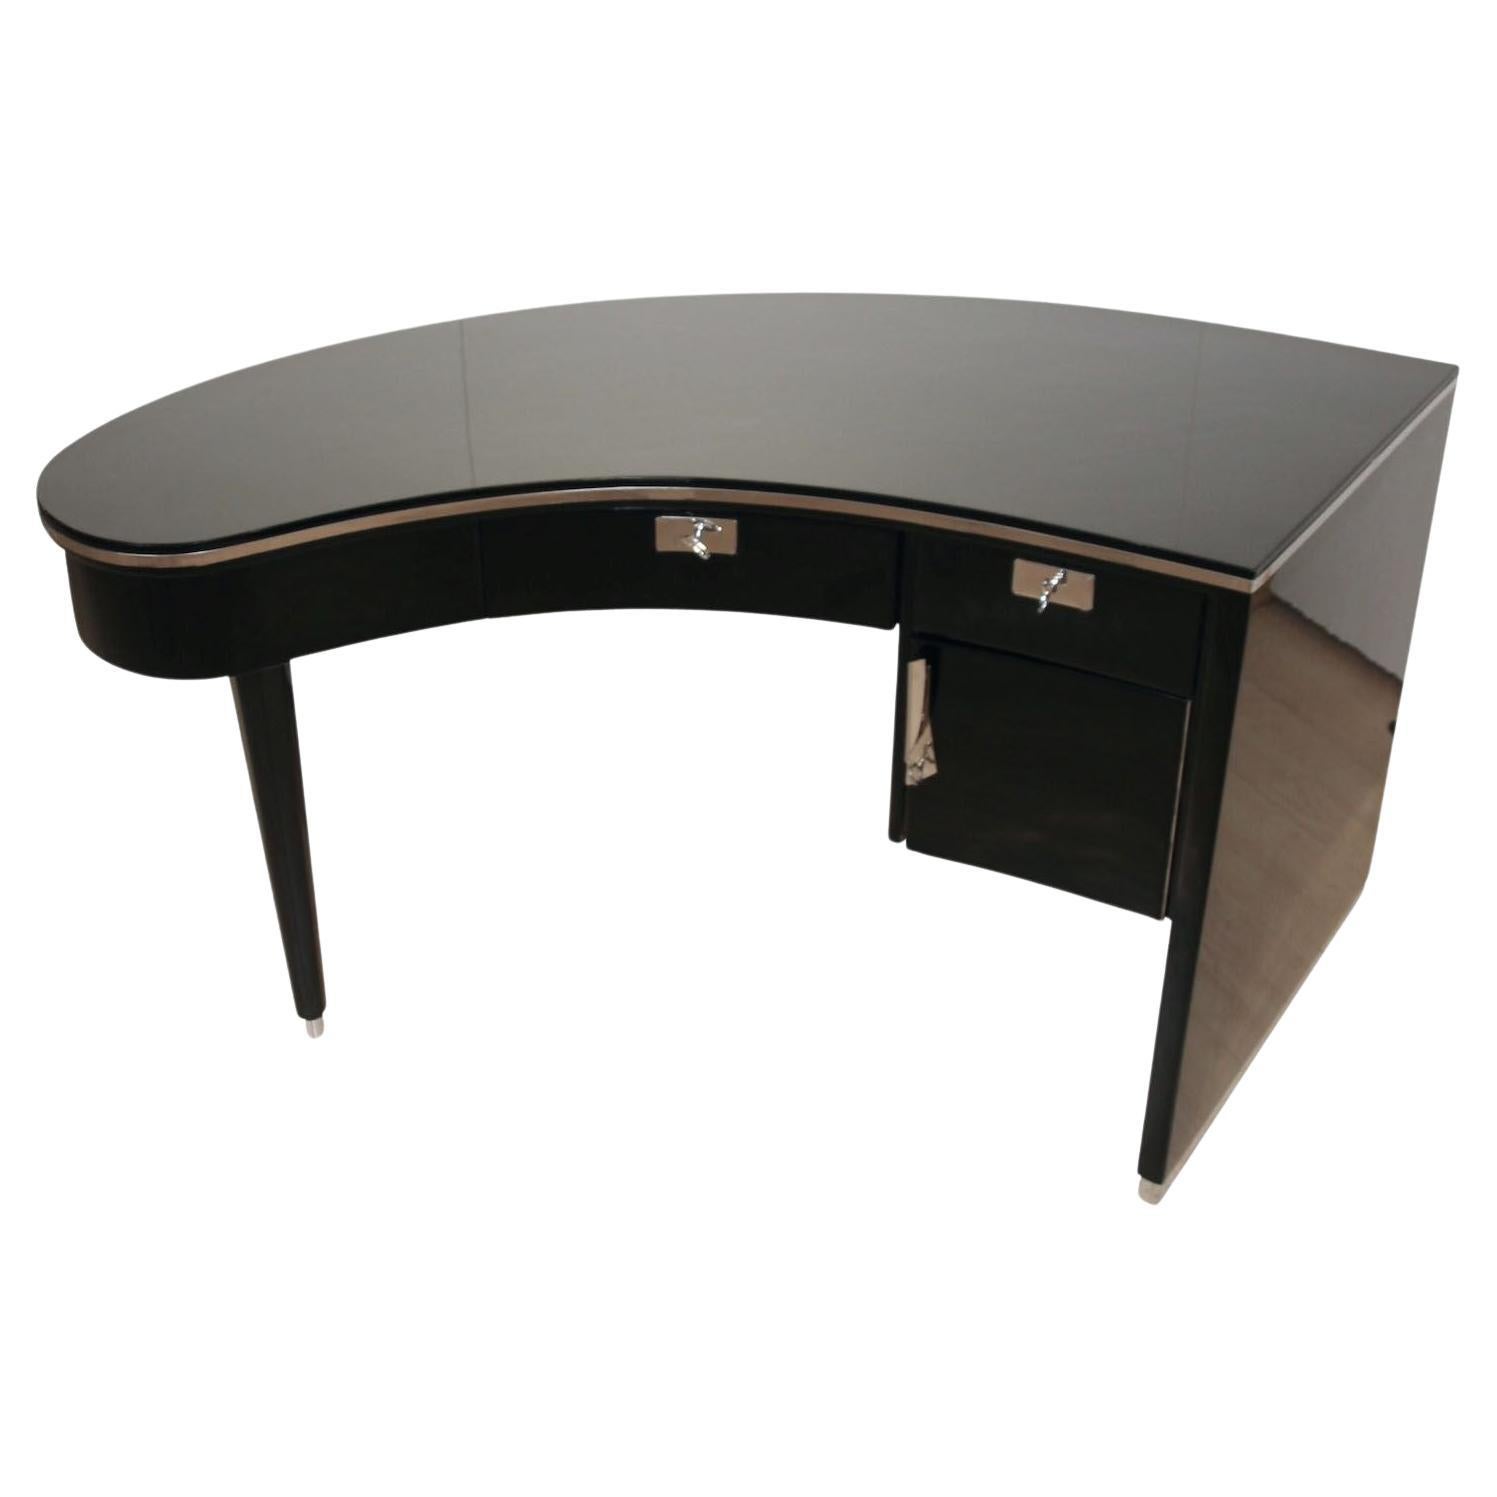 Design Desk, Curved Top, Piano Lacquer, Chrome, France, 1950s For Sale